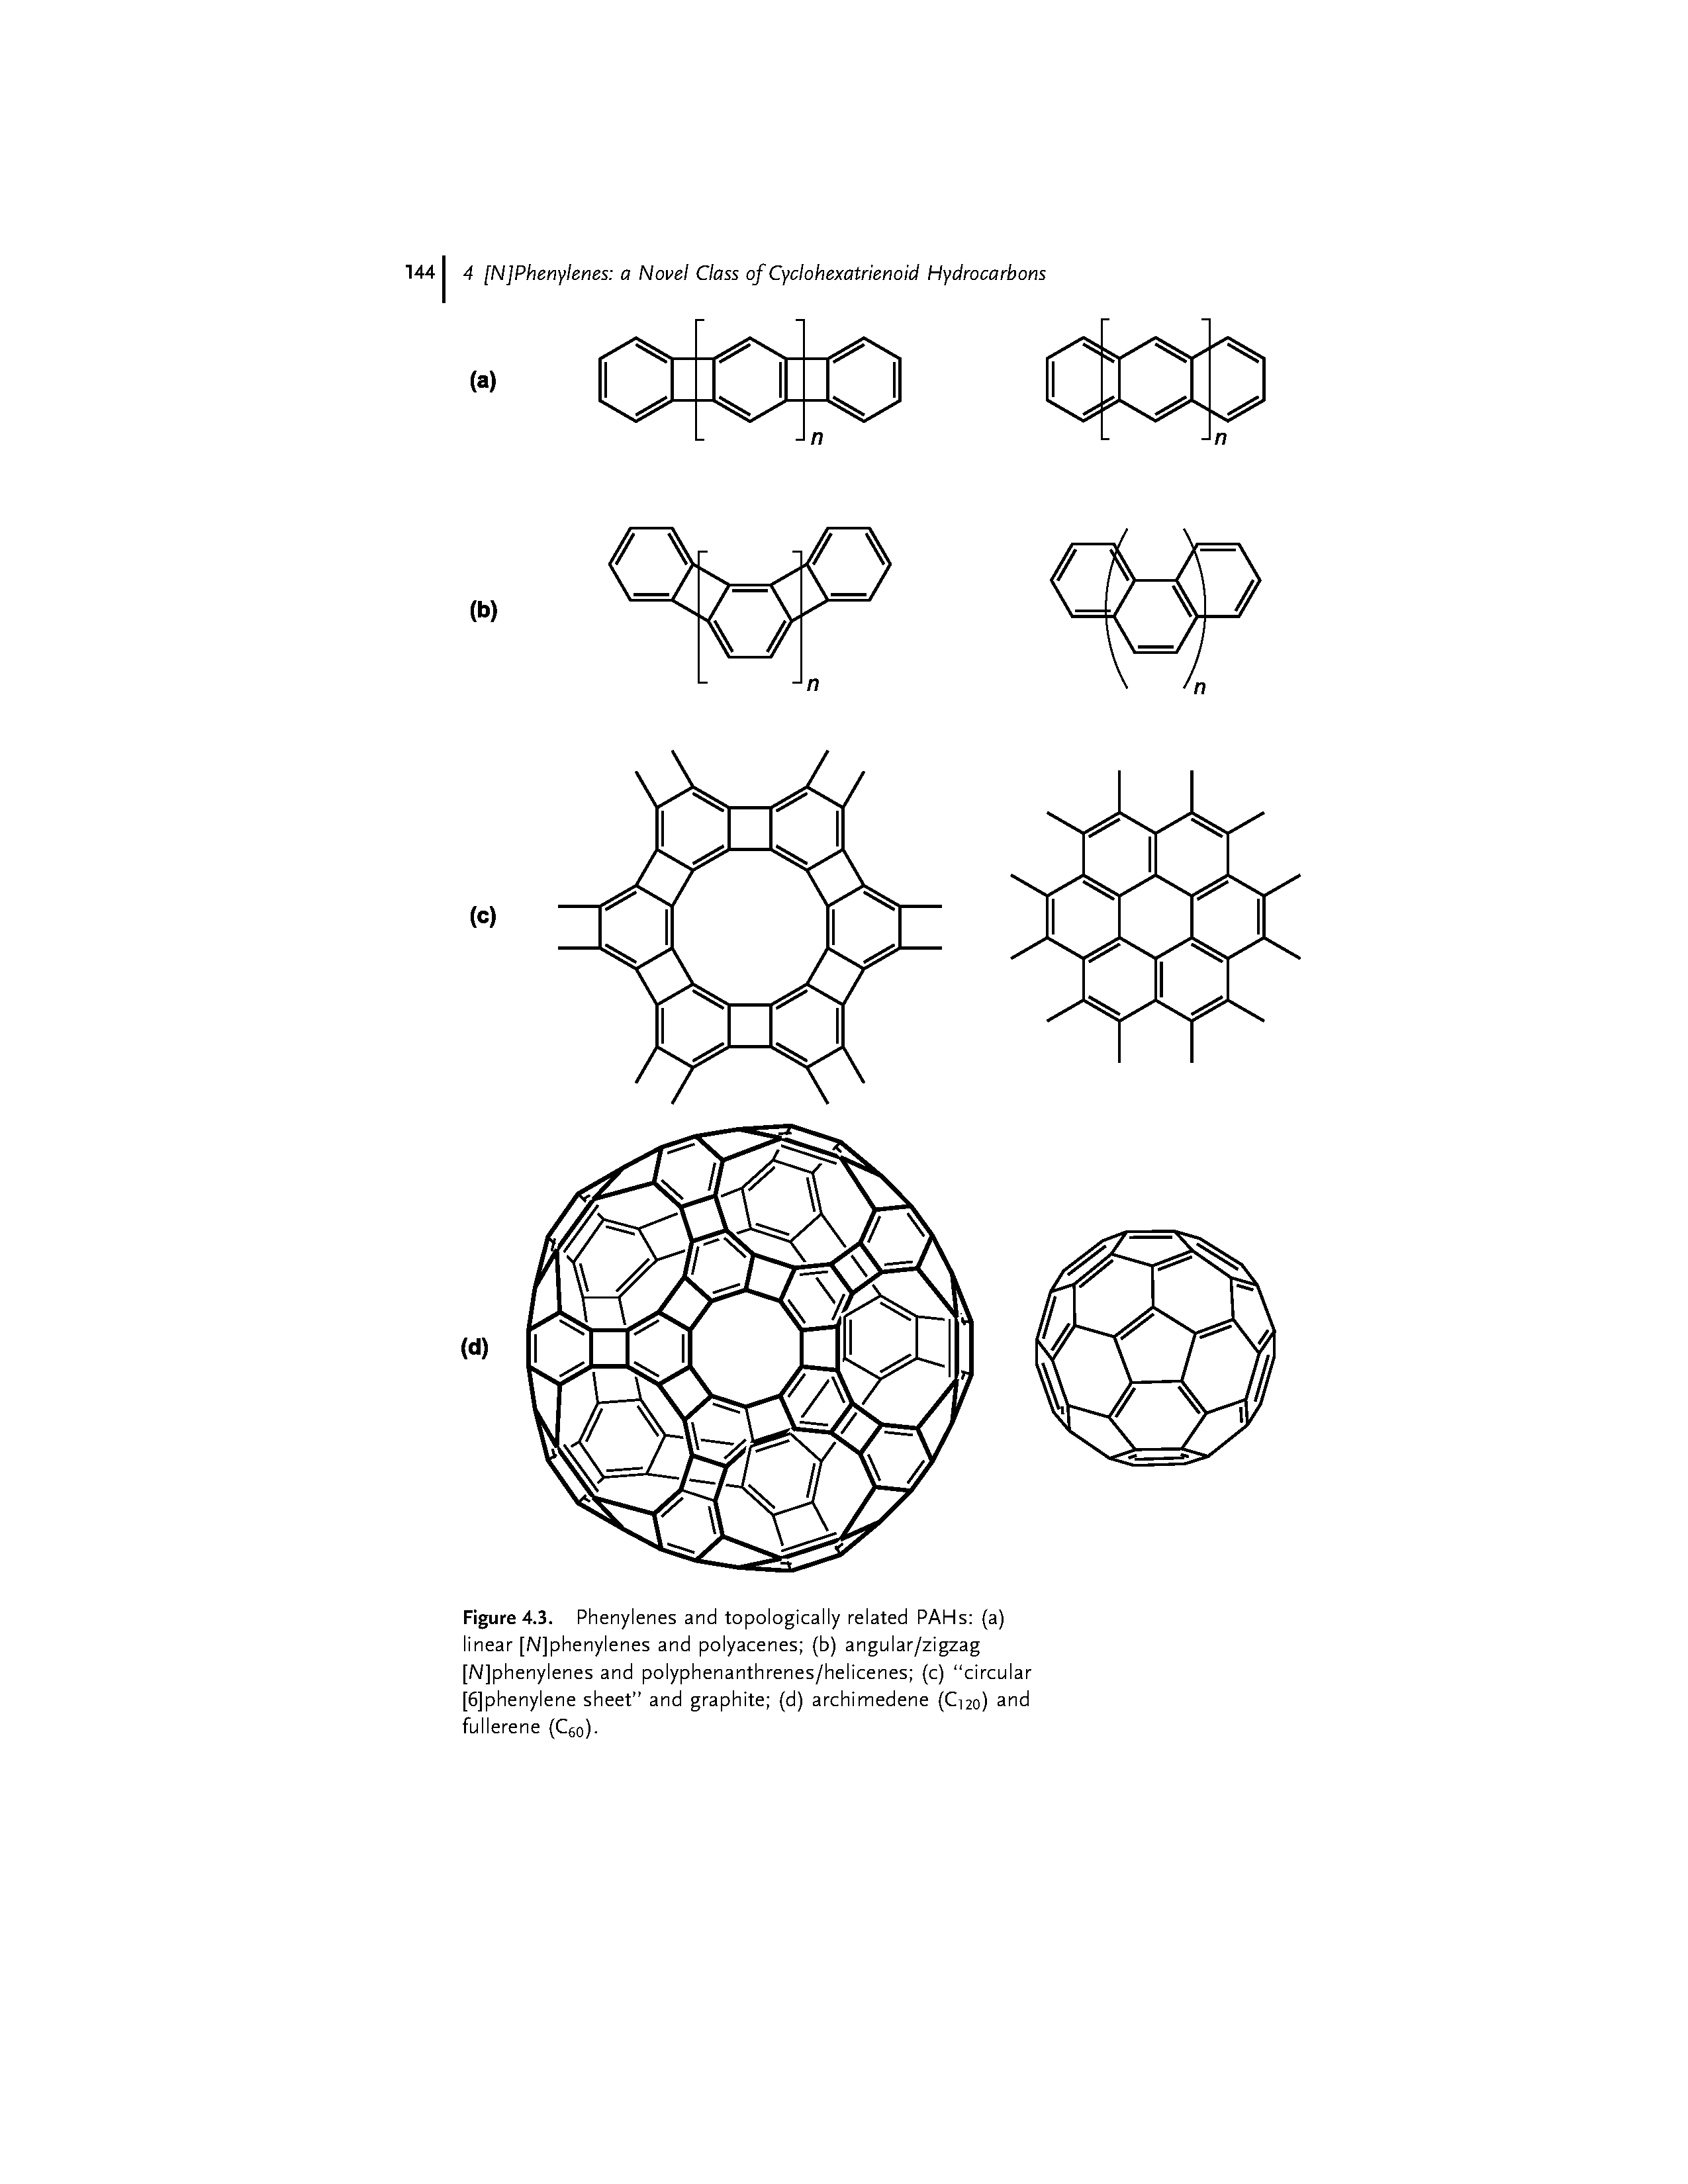 Figure 4.3. Phenylenes and topologically related PAHs (a) linear [/VJphenylenes and polyacenes (b) angular/zigzag [/VJphenylenes and polyphenanthrenes/helicenes (c) circular [6]phenylene sheet and graphite (d) archimedene (C120) and fullerene C o).